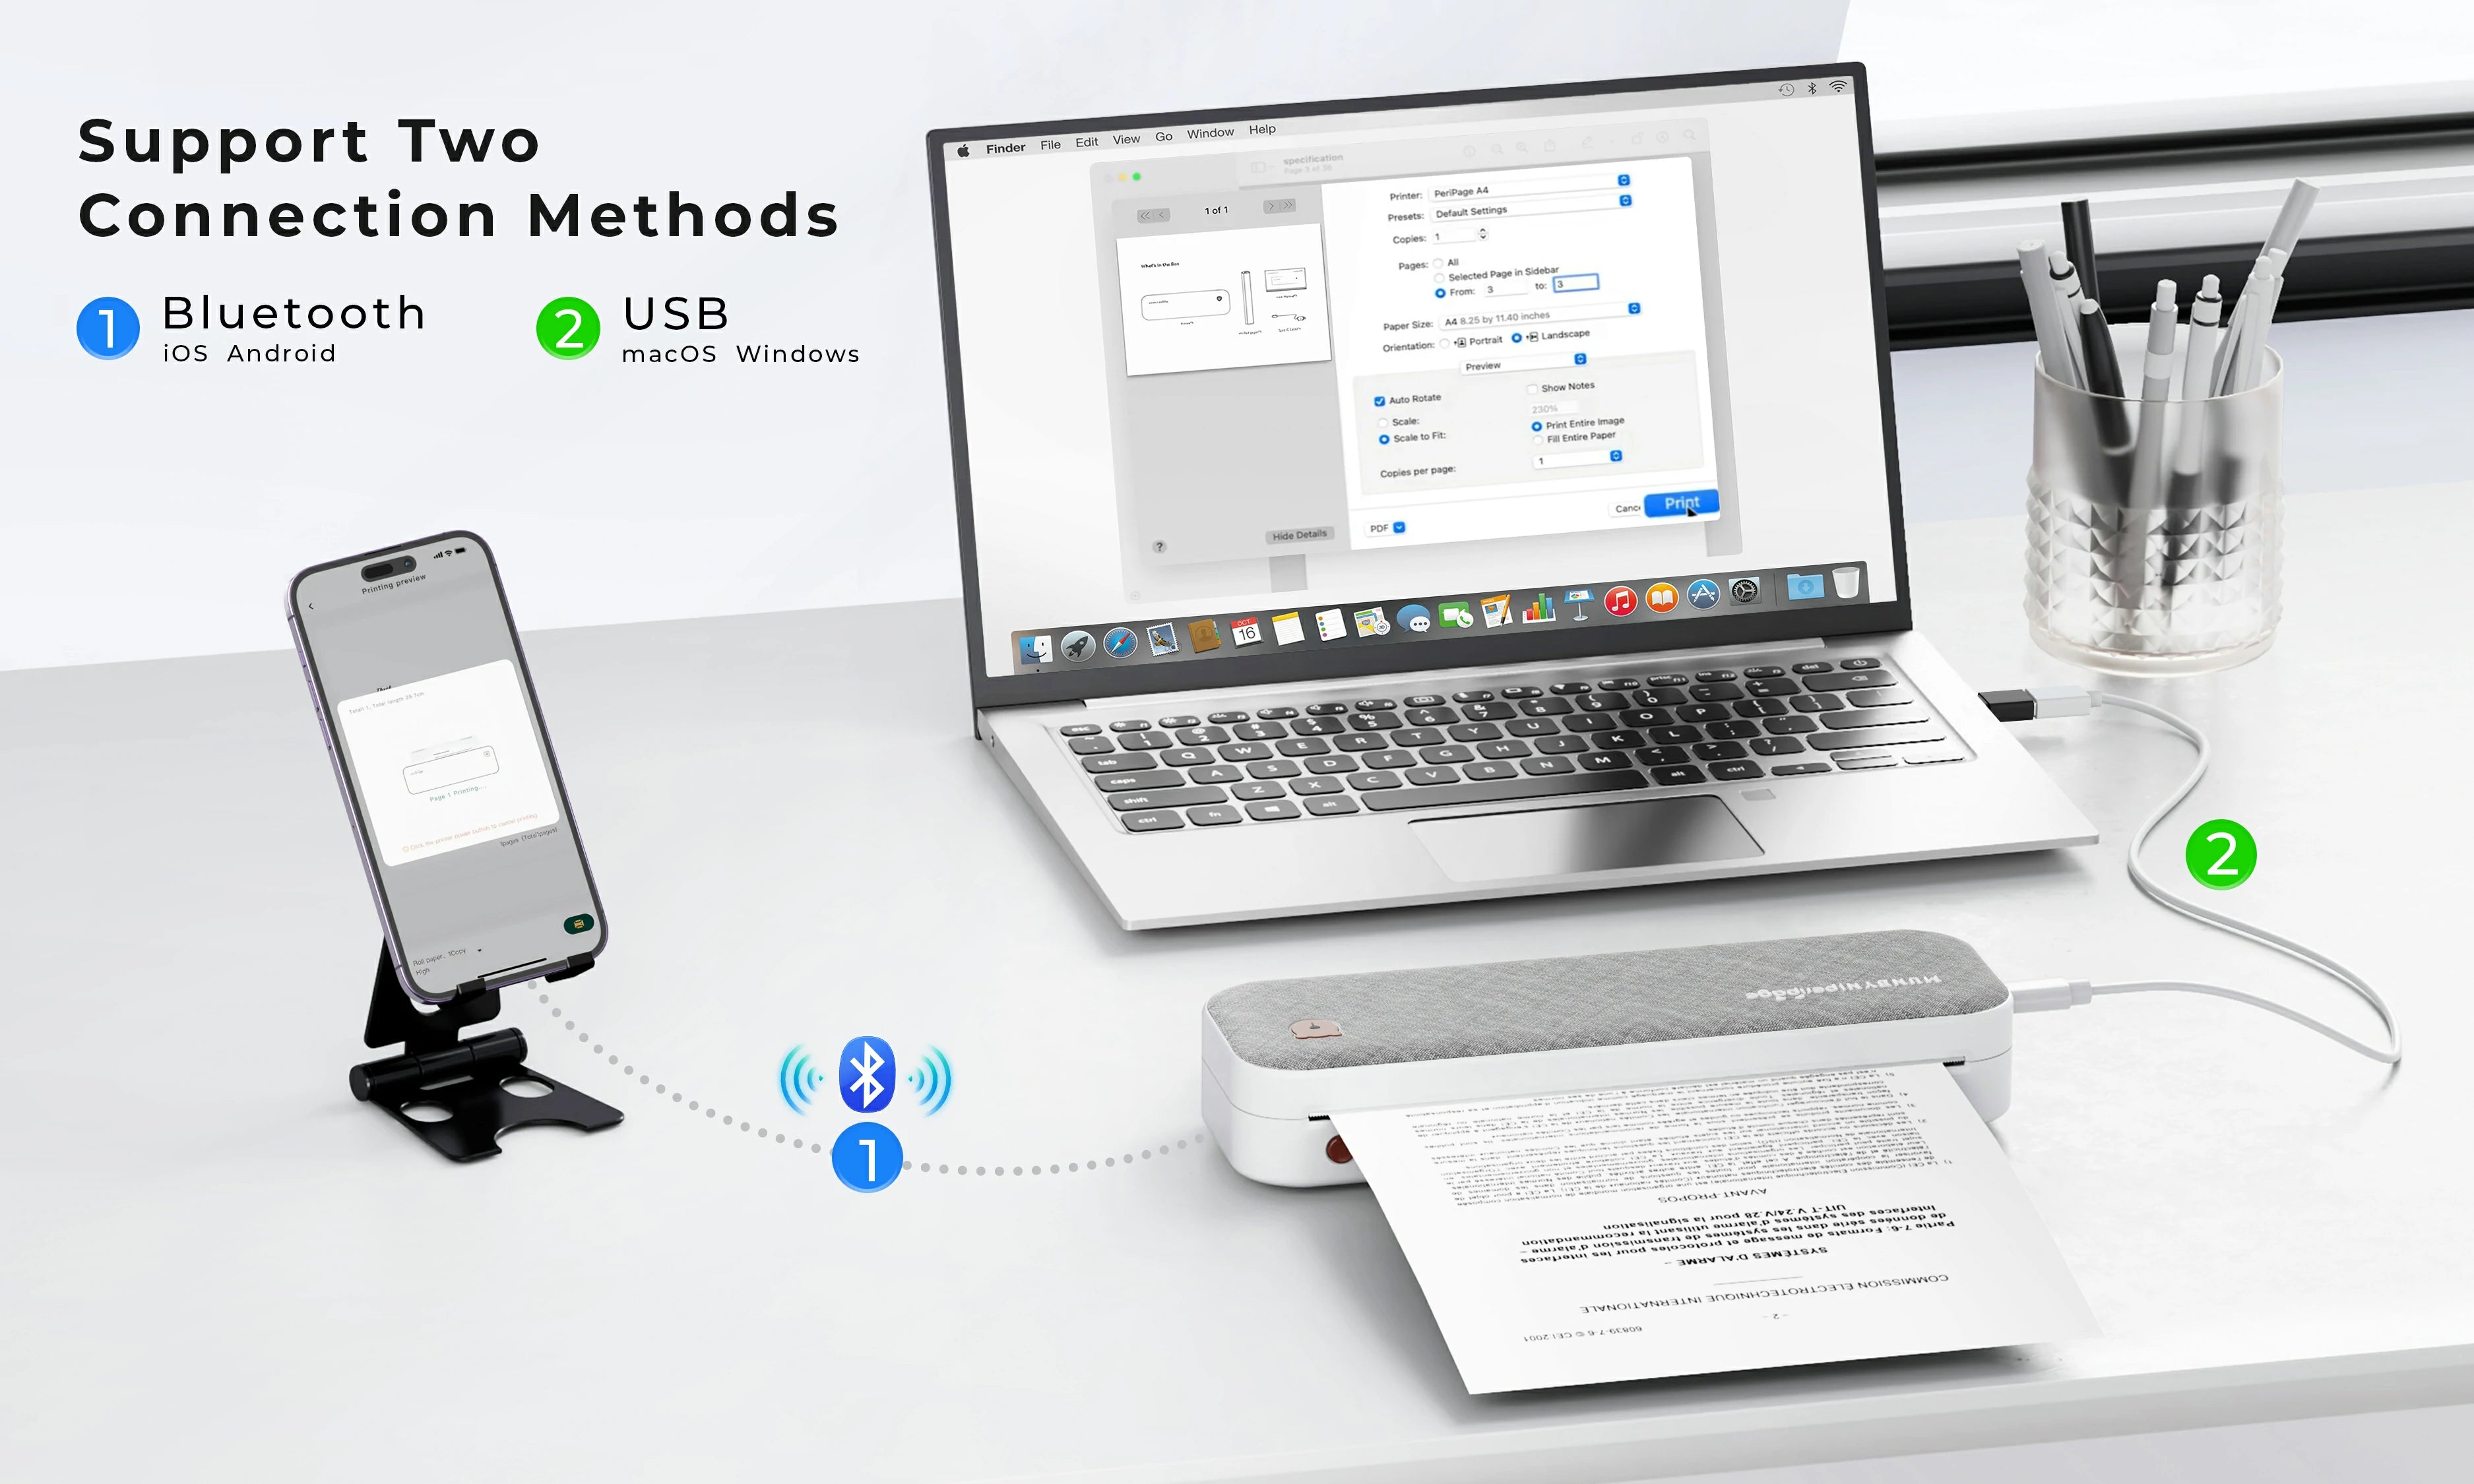 MUNBYN A4 printer can connect to your laptop, tablet, or smartphone via USB or Bluetooth.